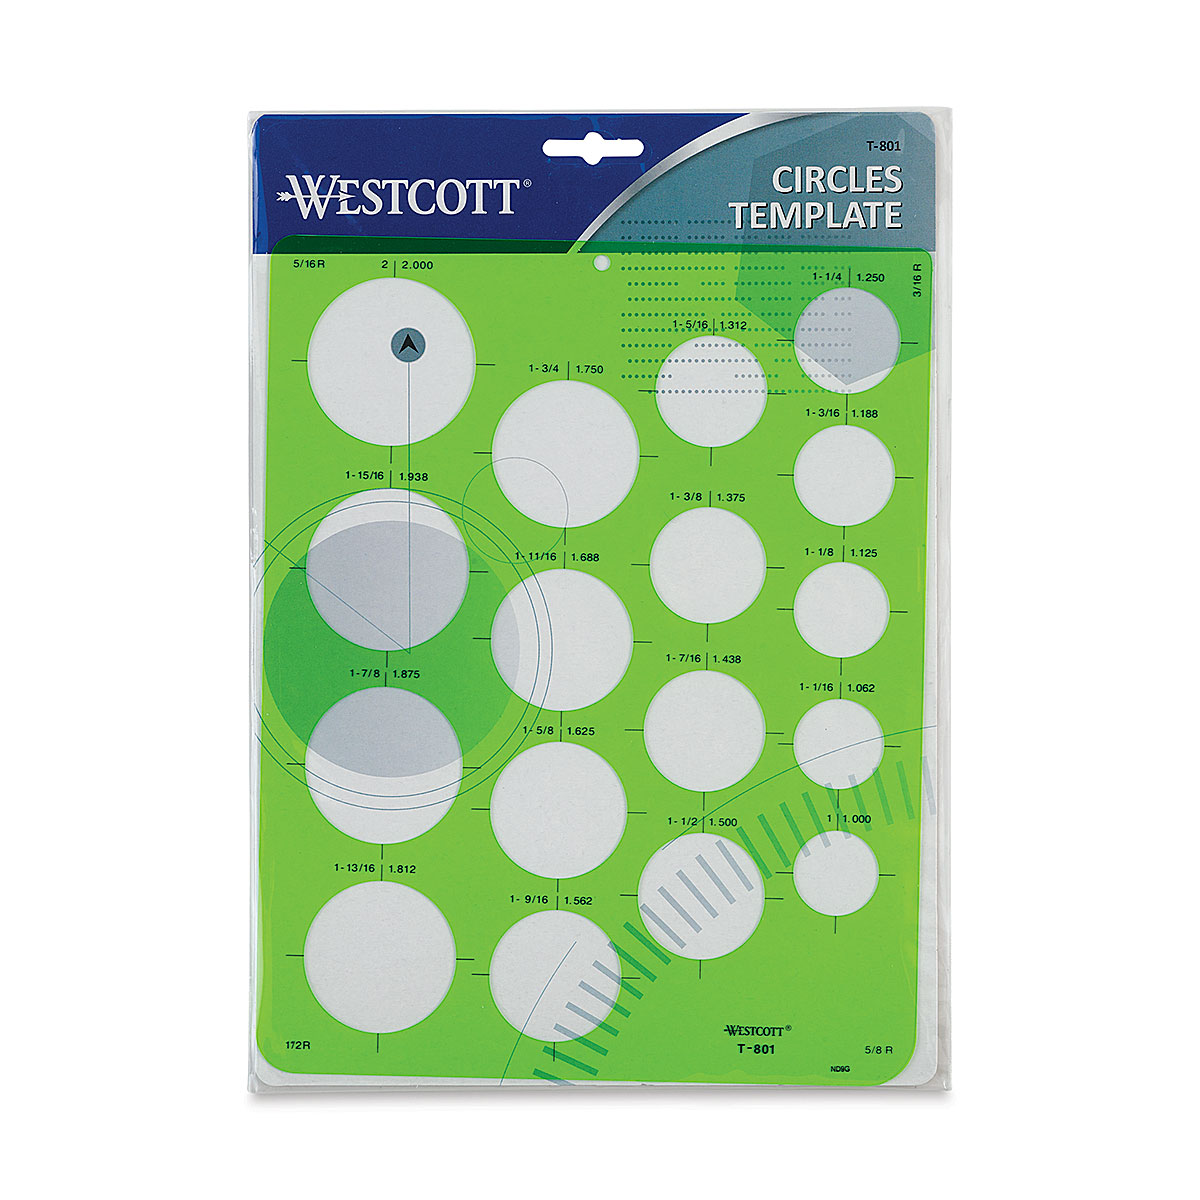 CIRCLES TEMPLATE From 1/16" to 2 1/4" C-Thru Circle Stencil Plastic 